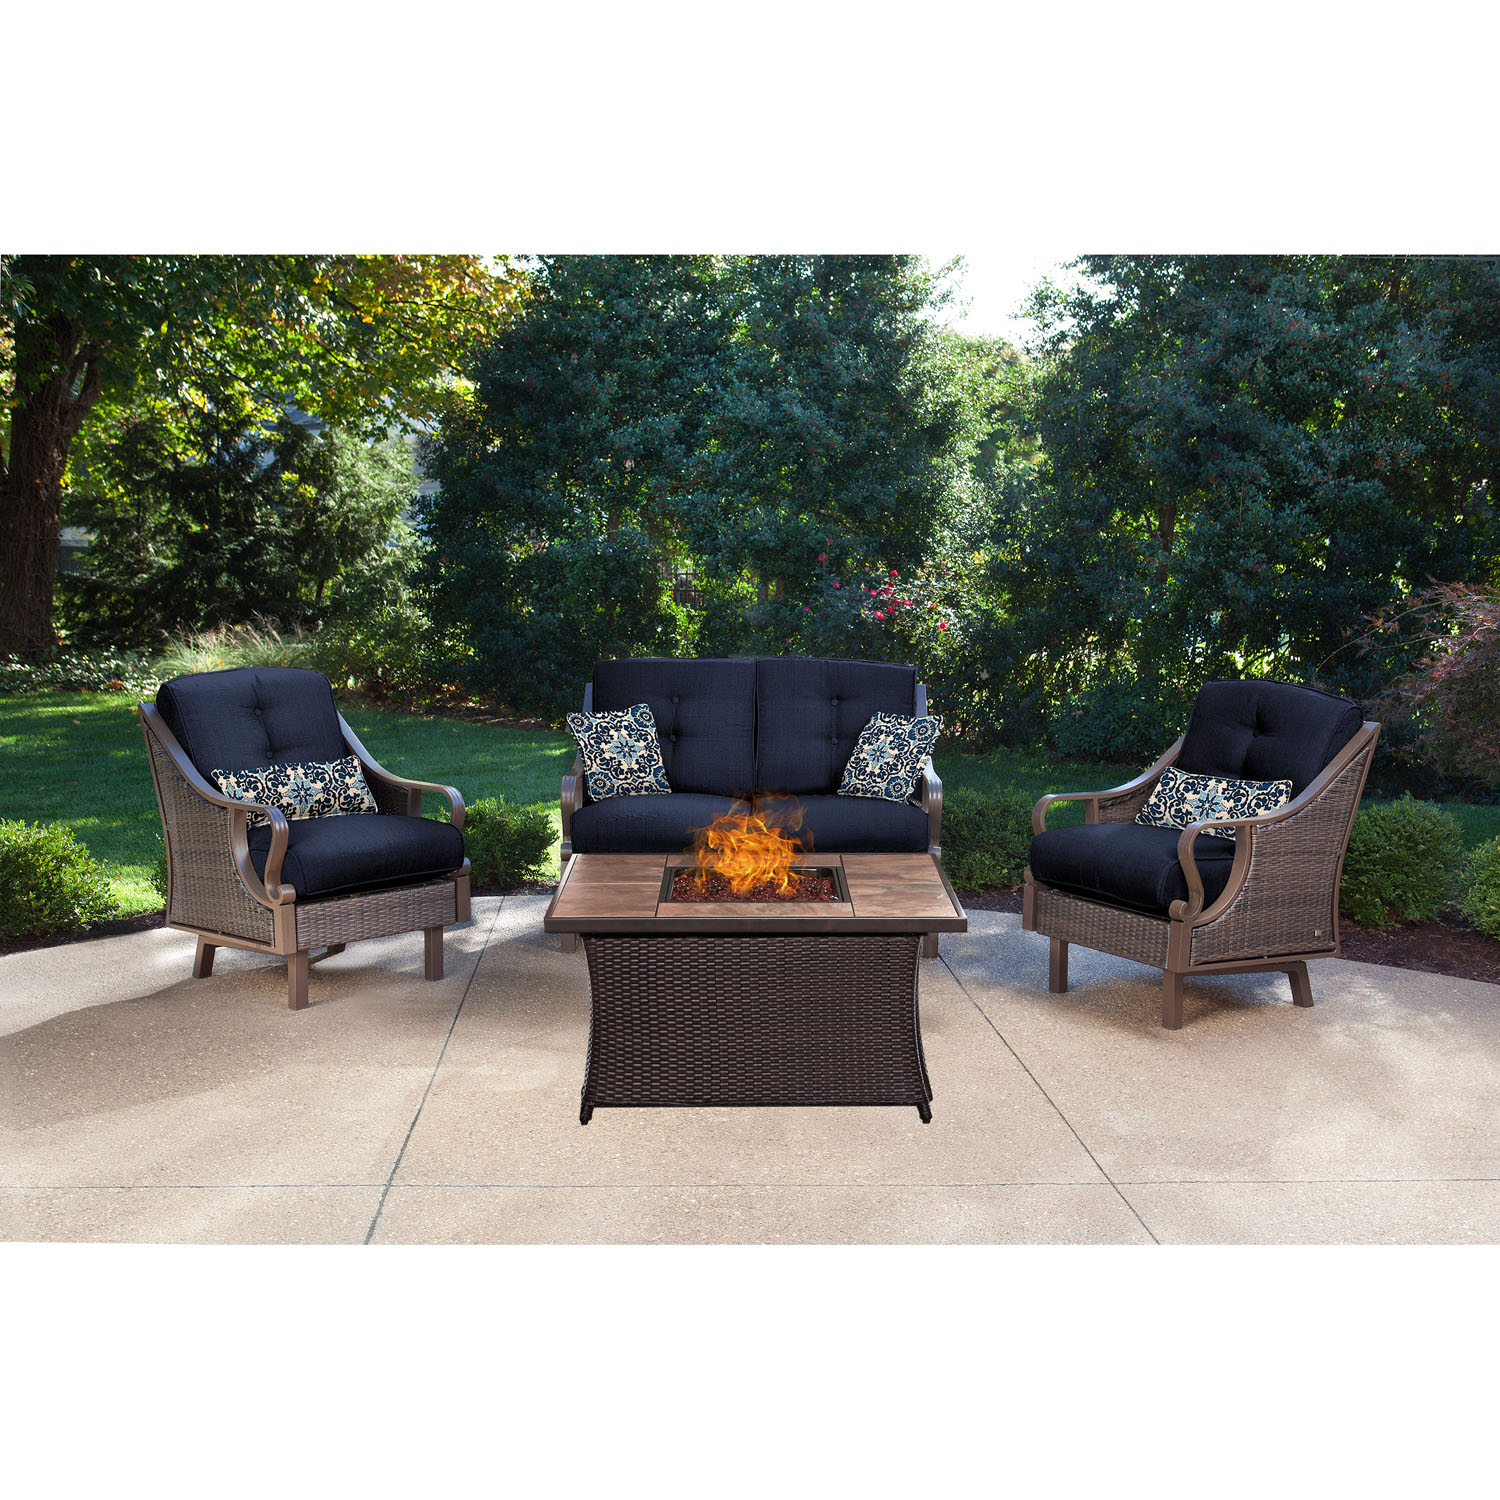 Hanover Ventura 4-Piece Fire Pit Lounge Set with Faux-Stone Tile Top - image 1 of 12